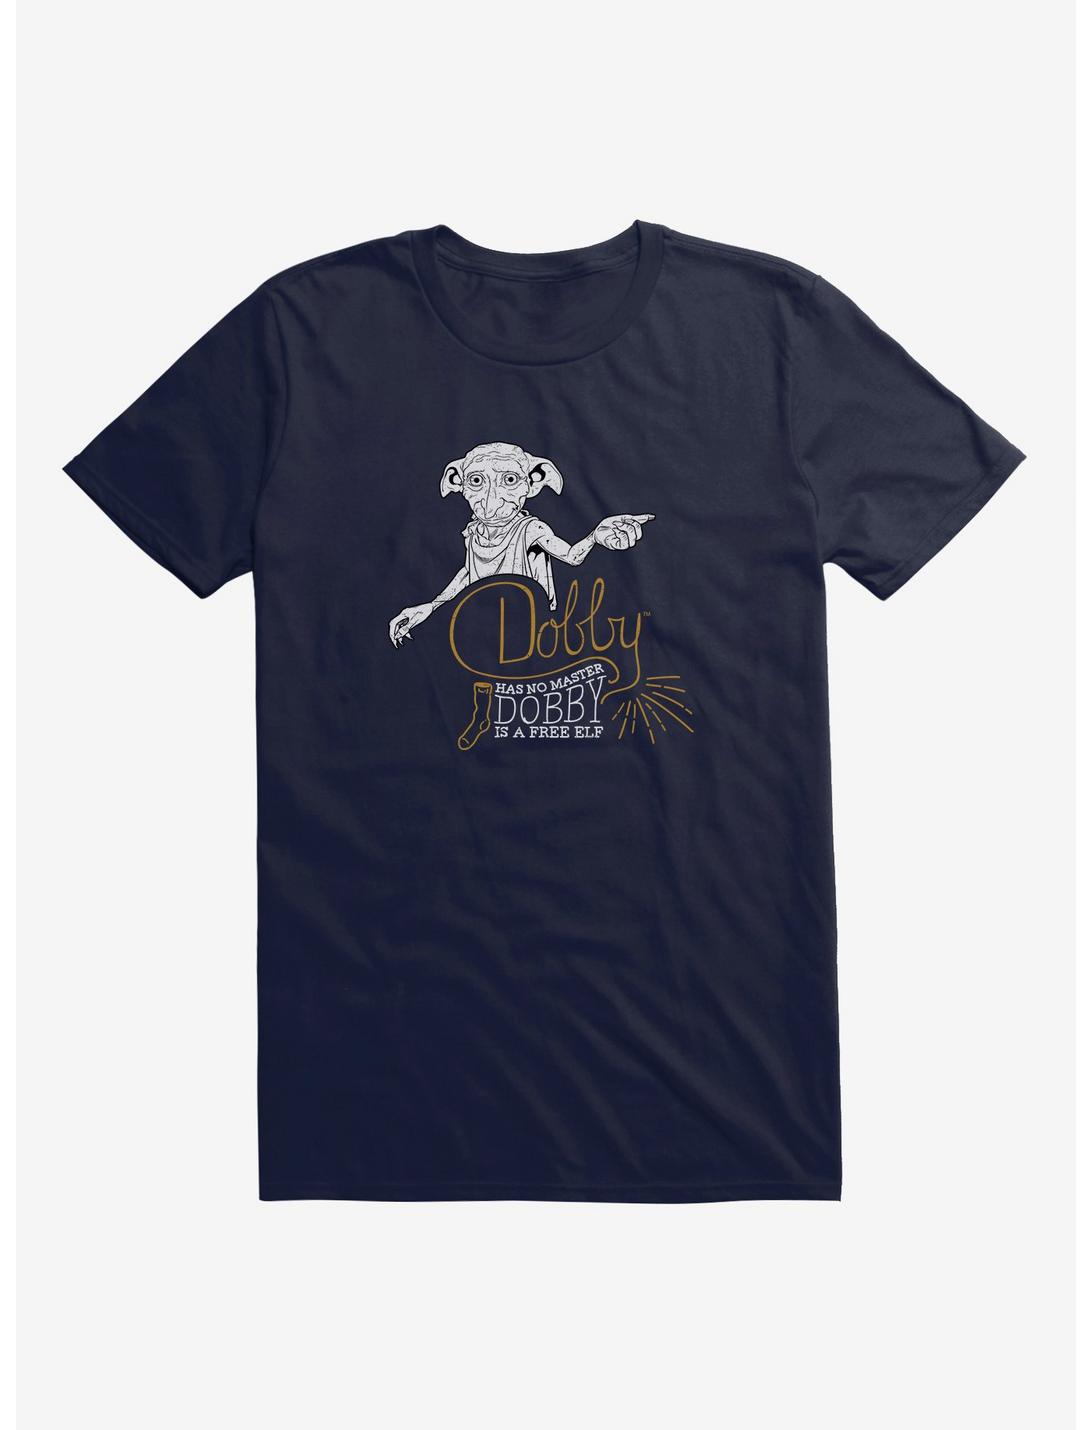 Harry Potter Dobby Is A Free Elf T-Shirt, , hi-res